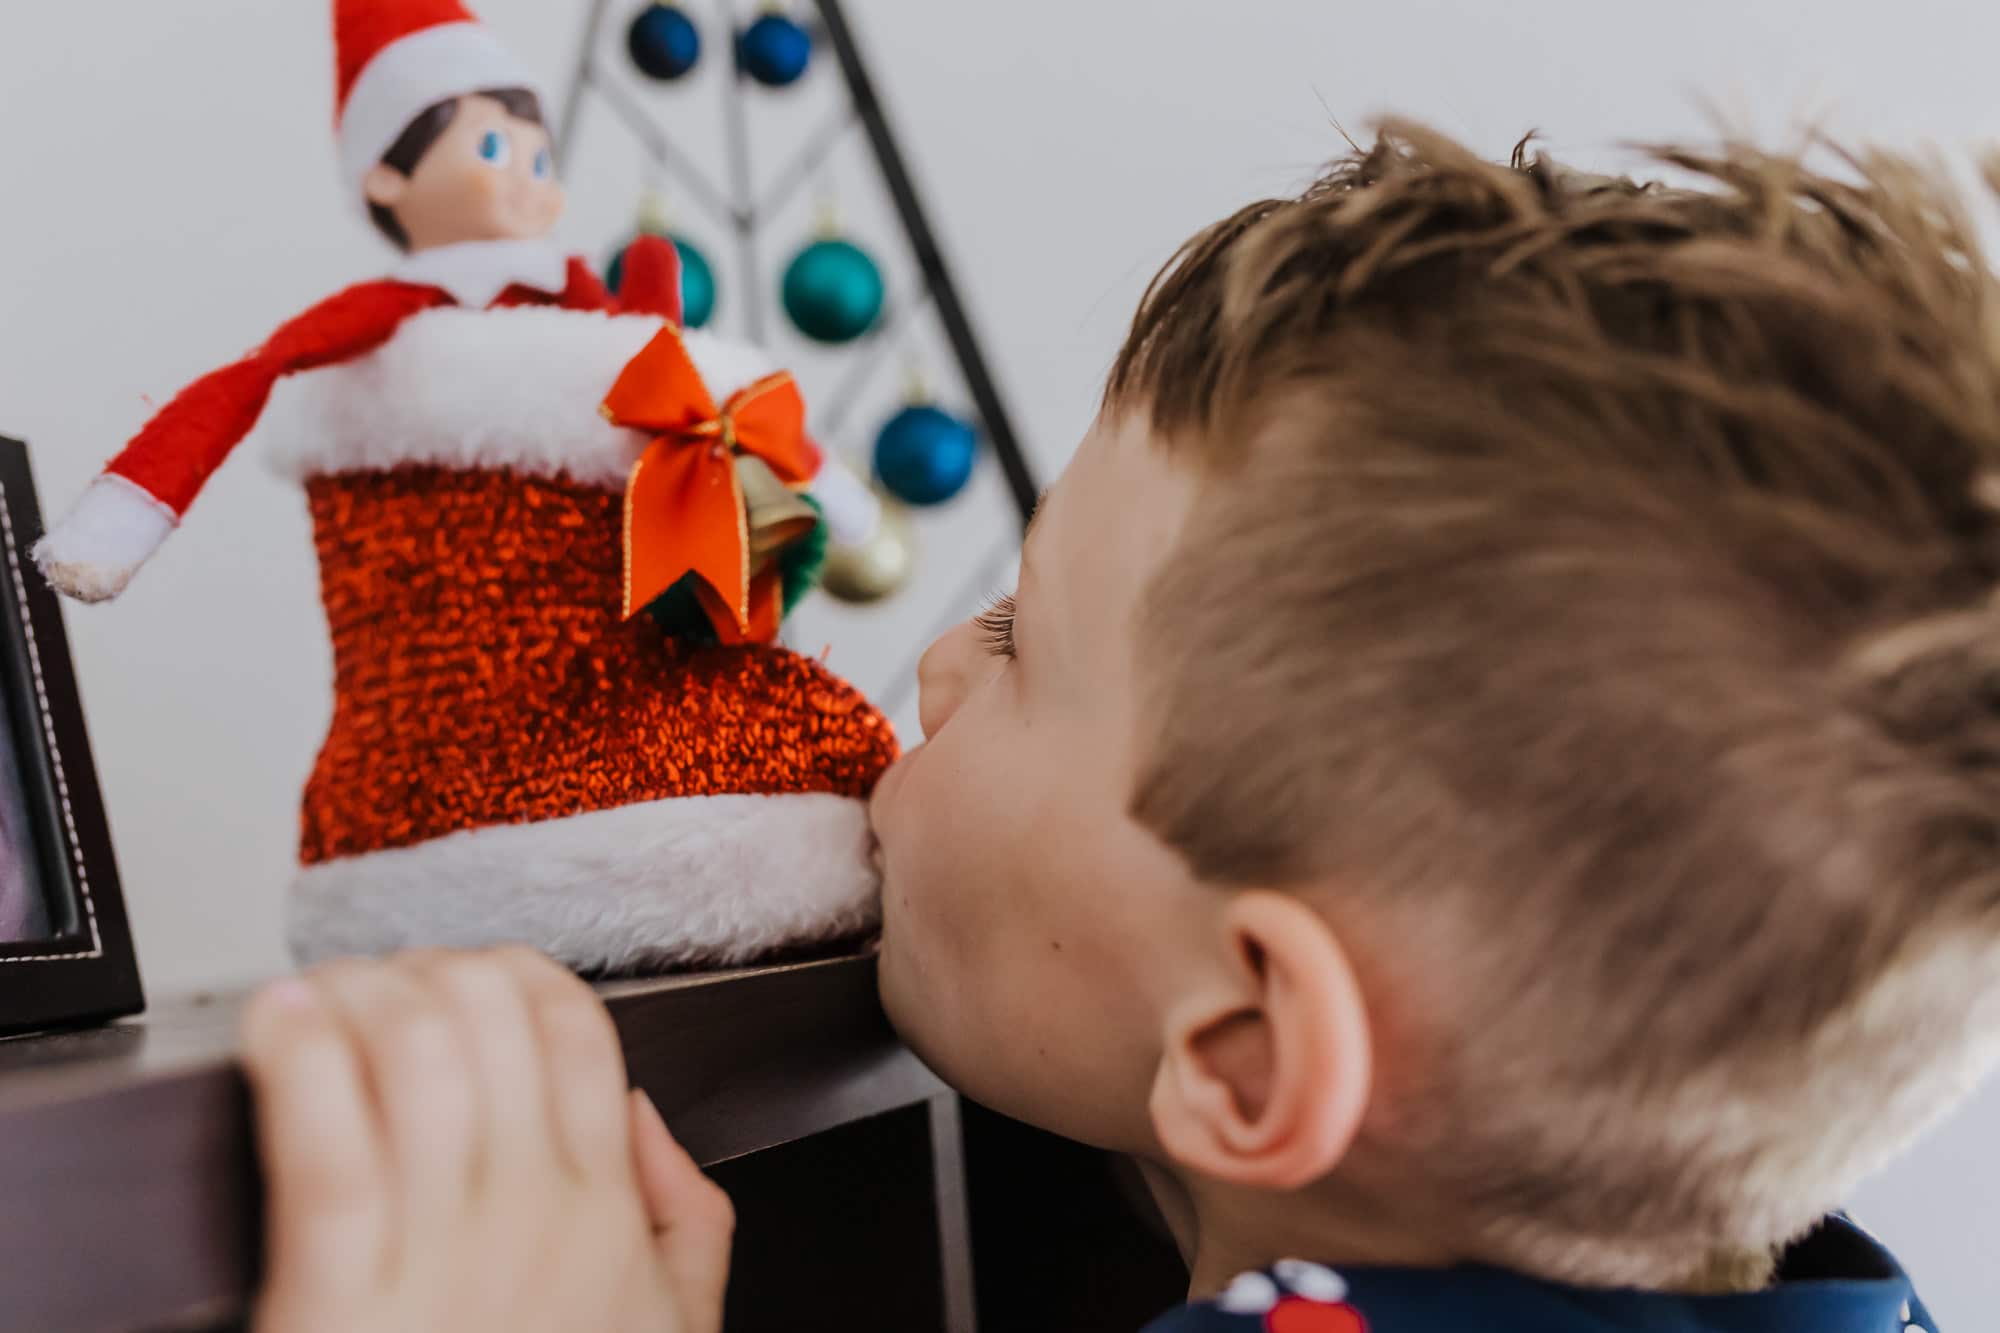 little 6 year old boy give the Elf on the Shelf a kiss on the big boot